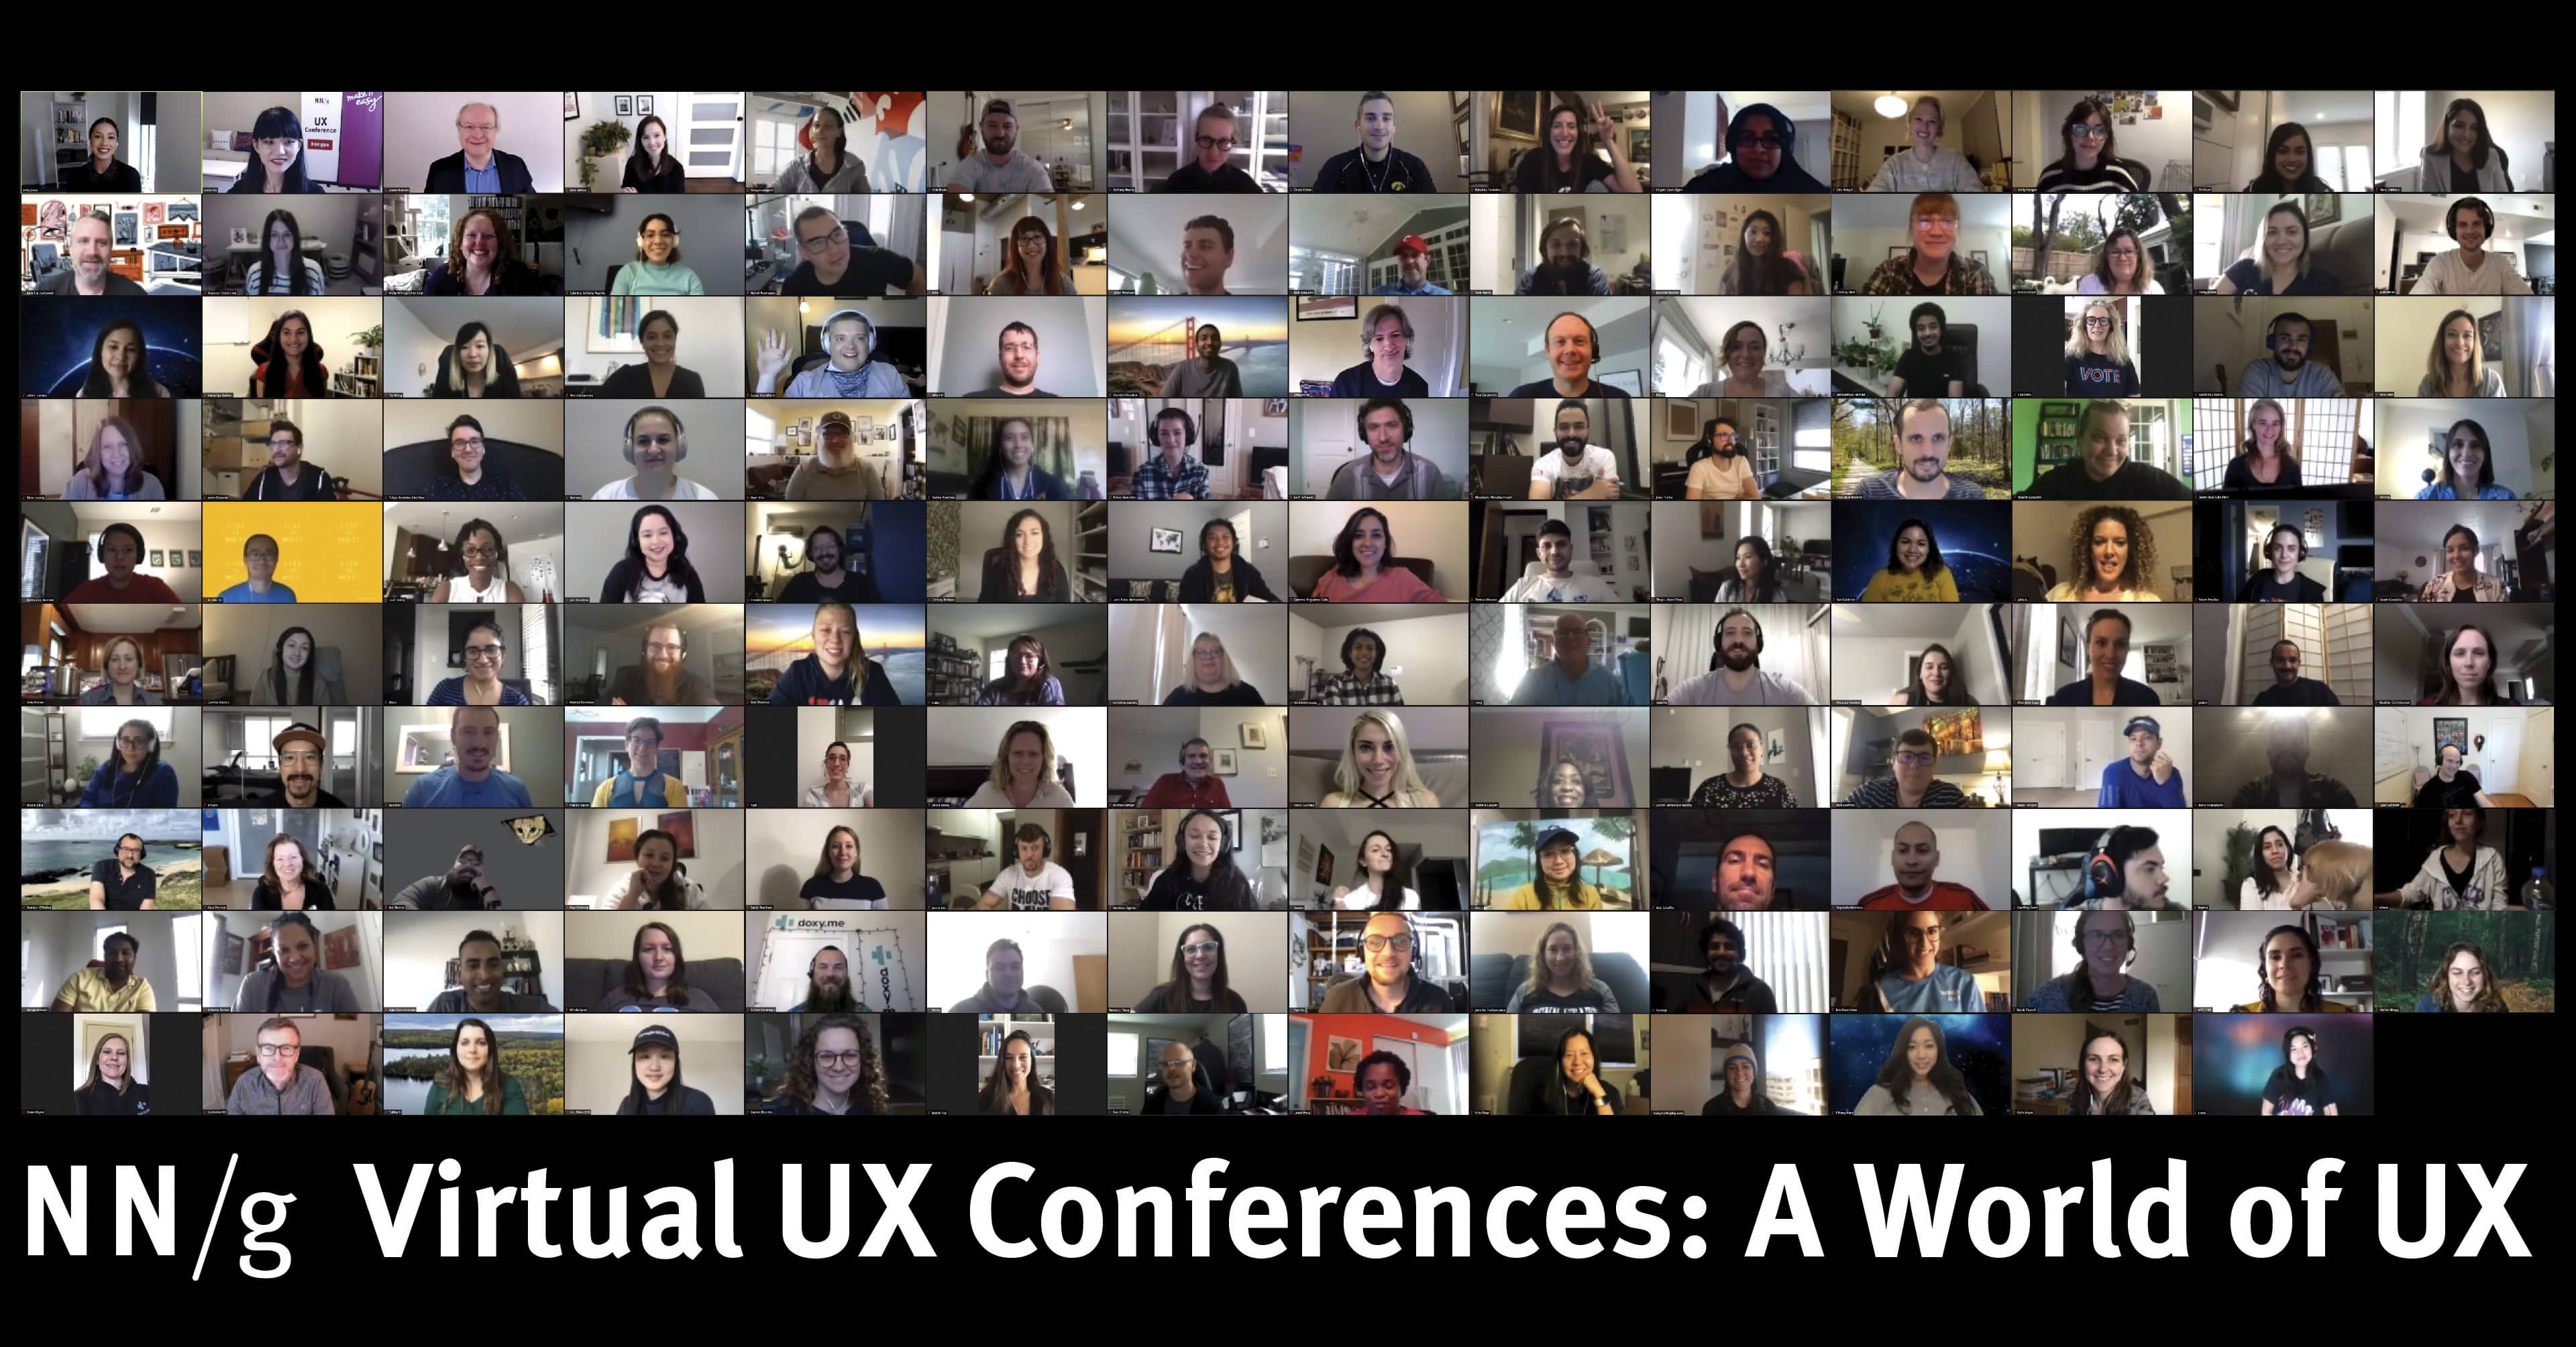 Group photo of participants at the Virtual UX Conference